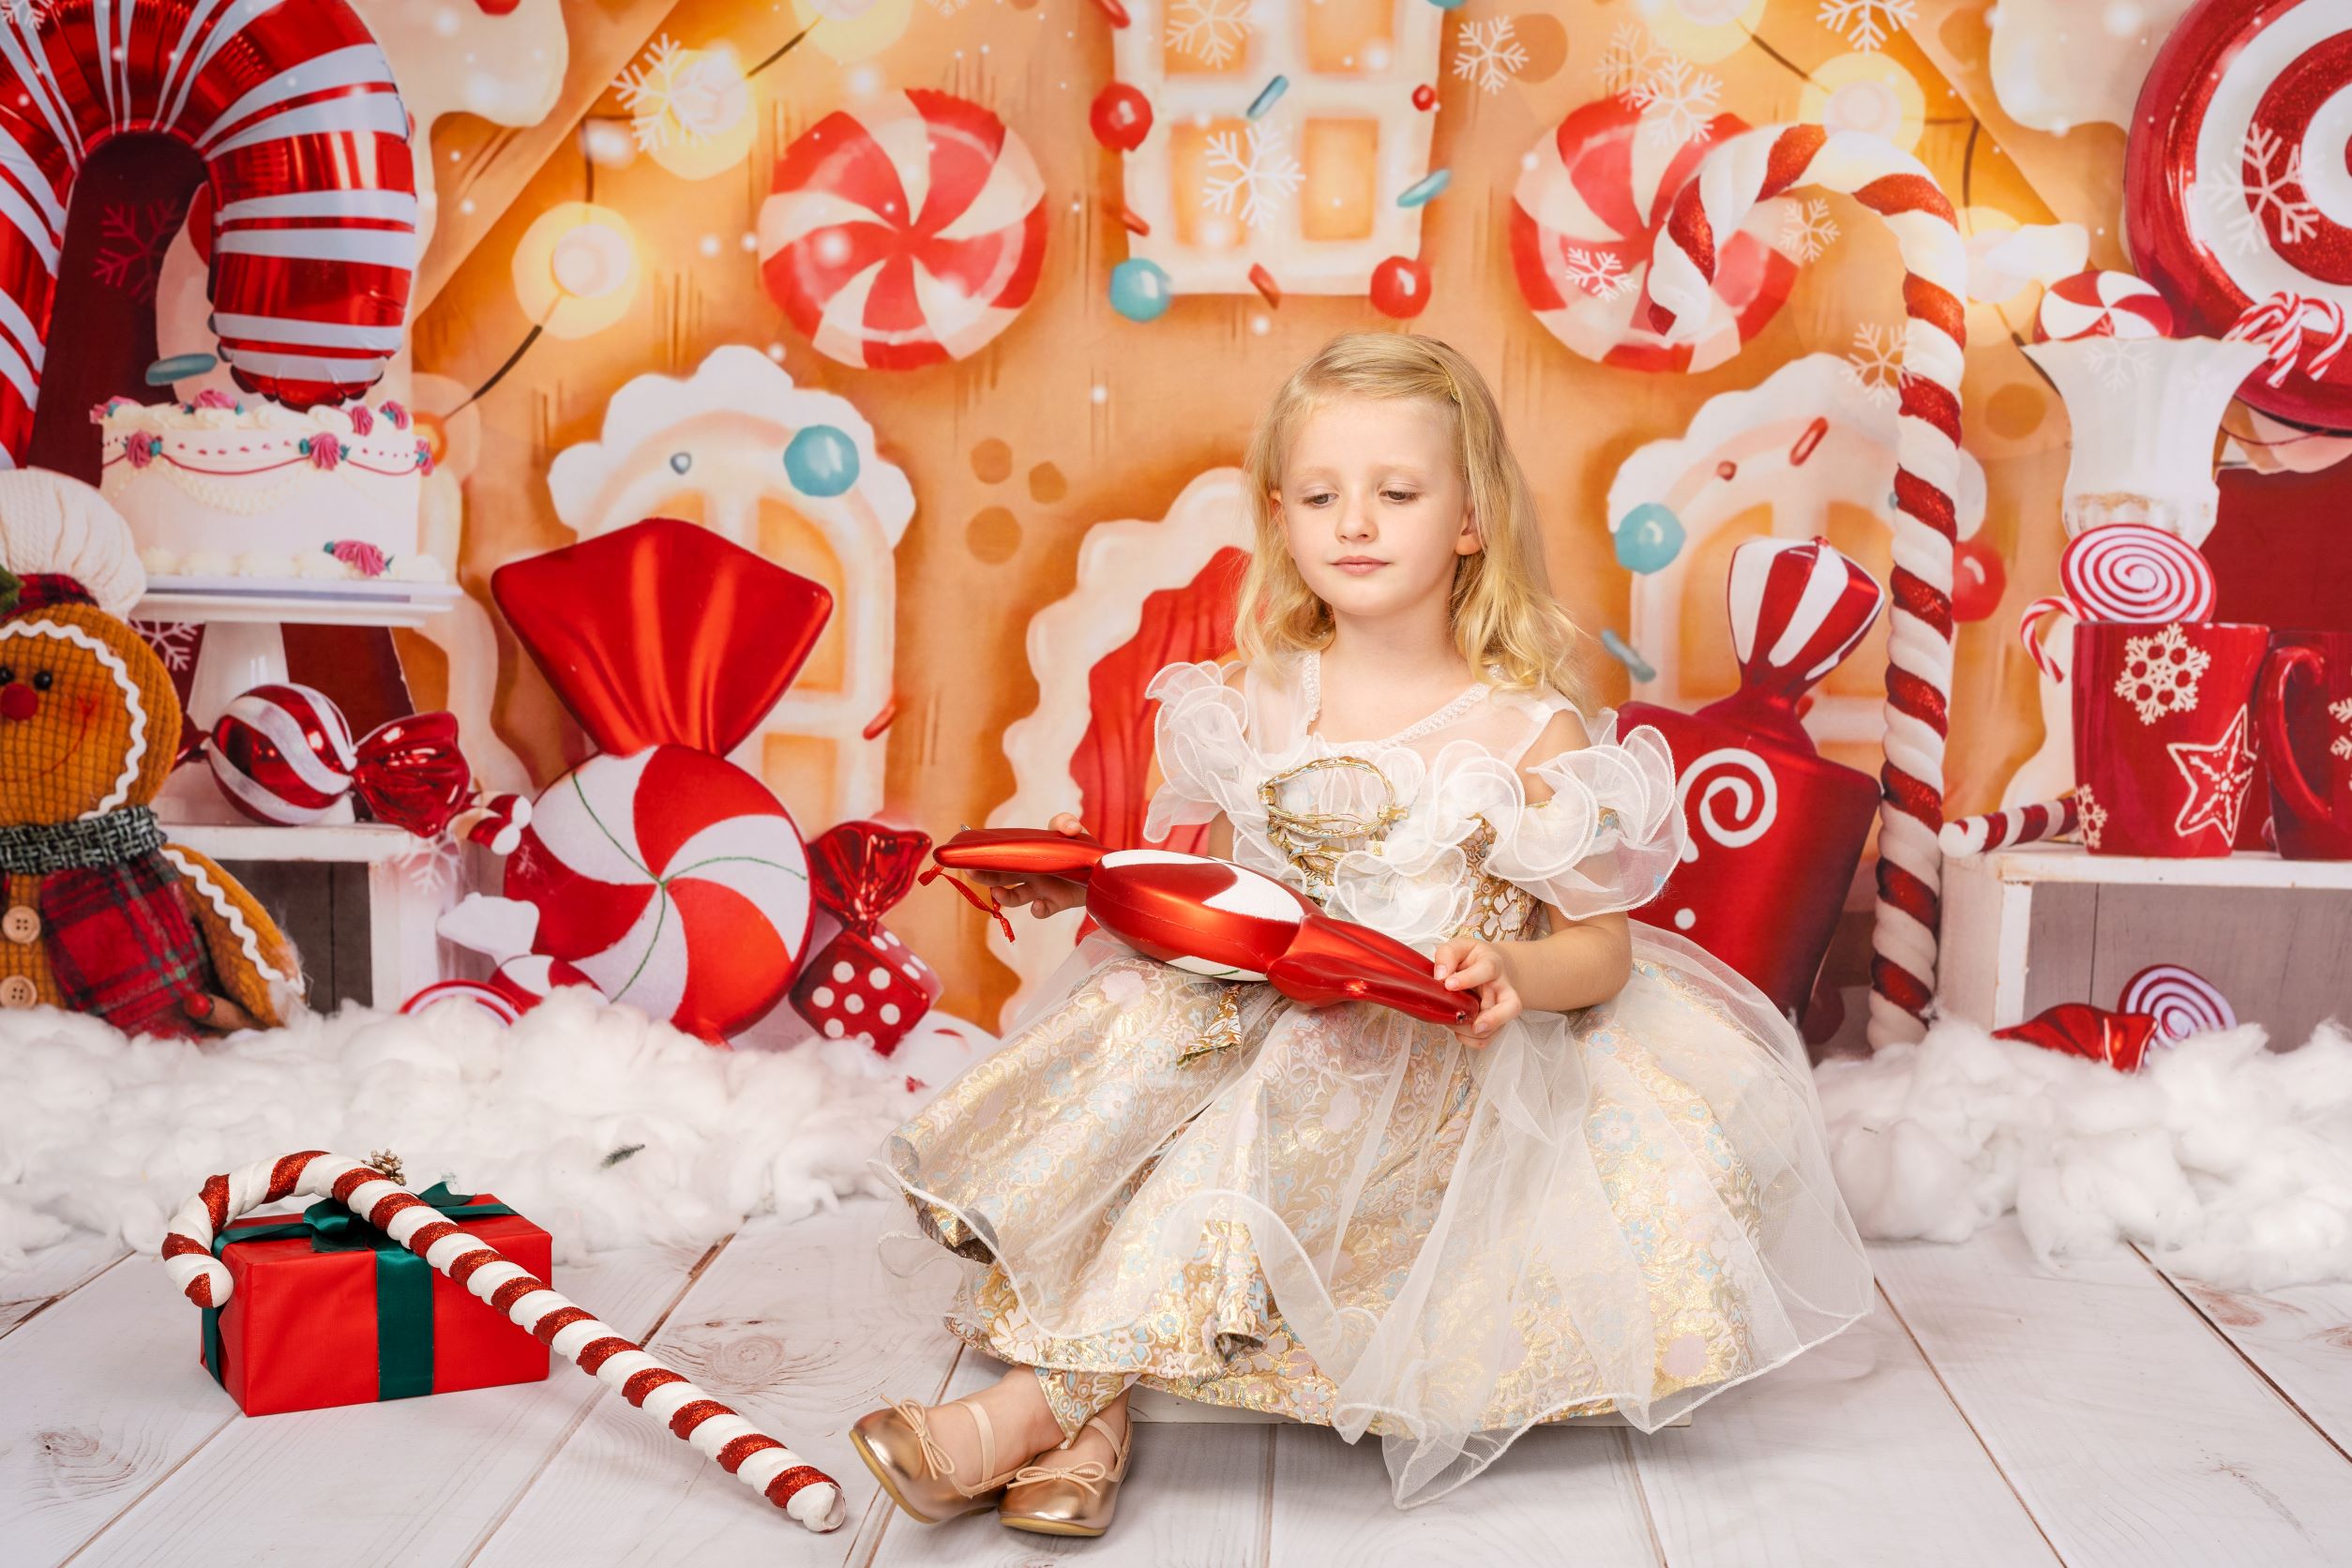 Kate Christmas Backdrop Gingerbread House Candy for Photography